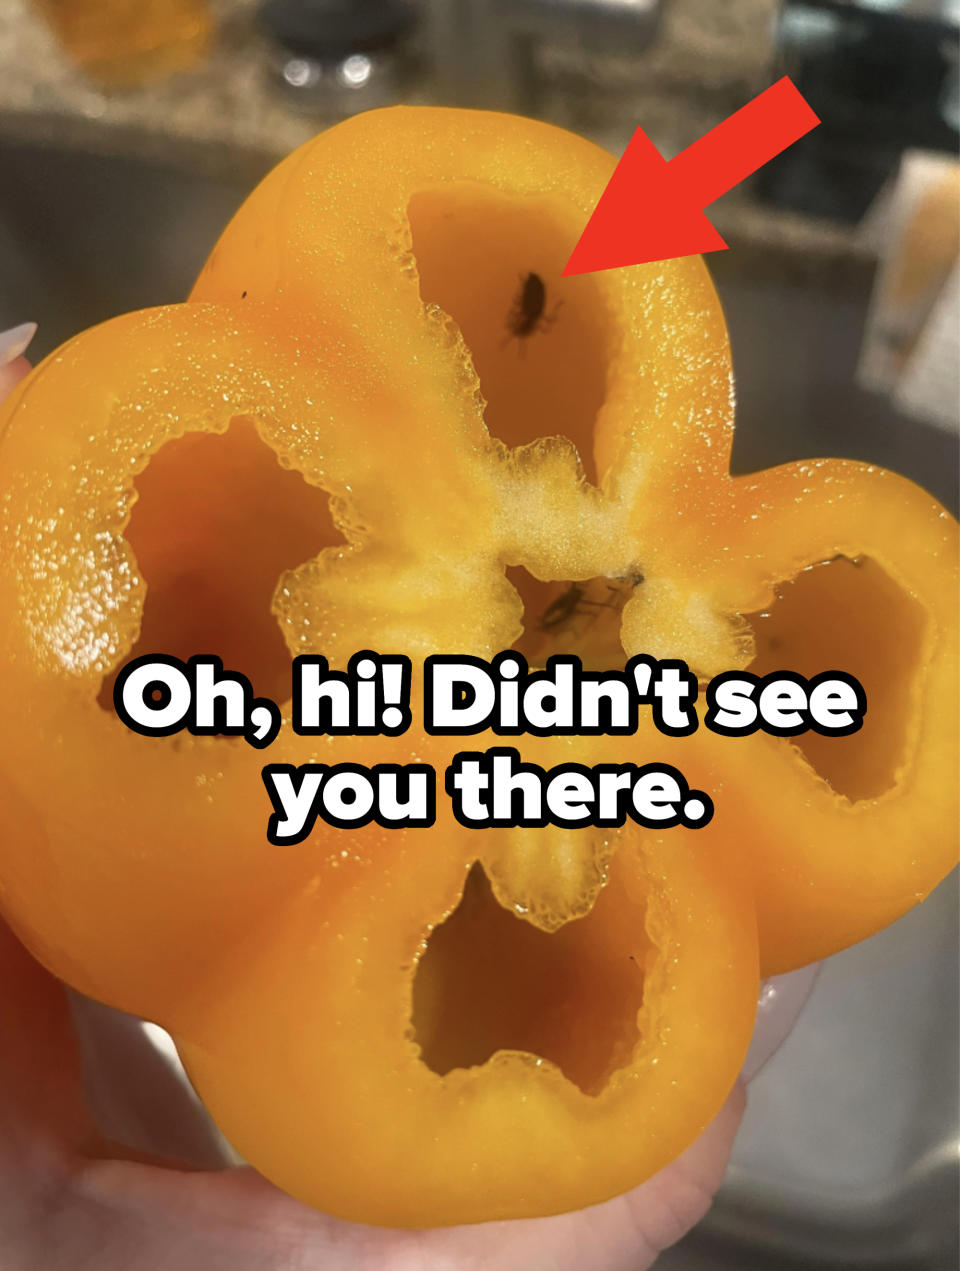 "Oh, hi! Didn't see you there": An insect is inside a bell pepper